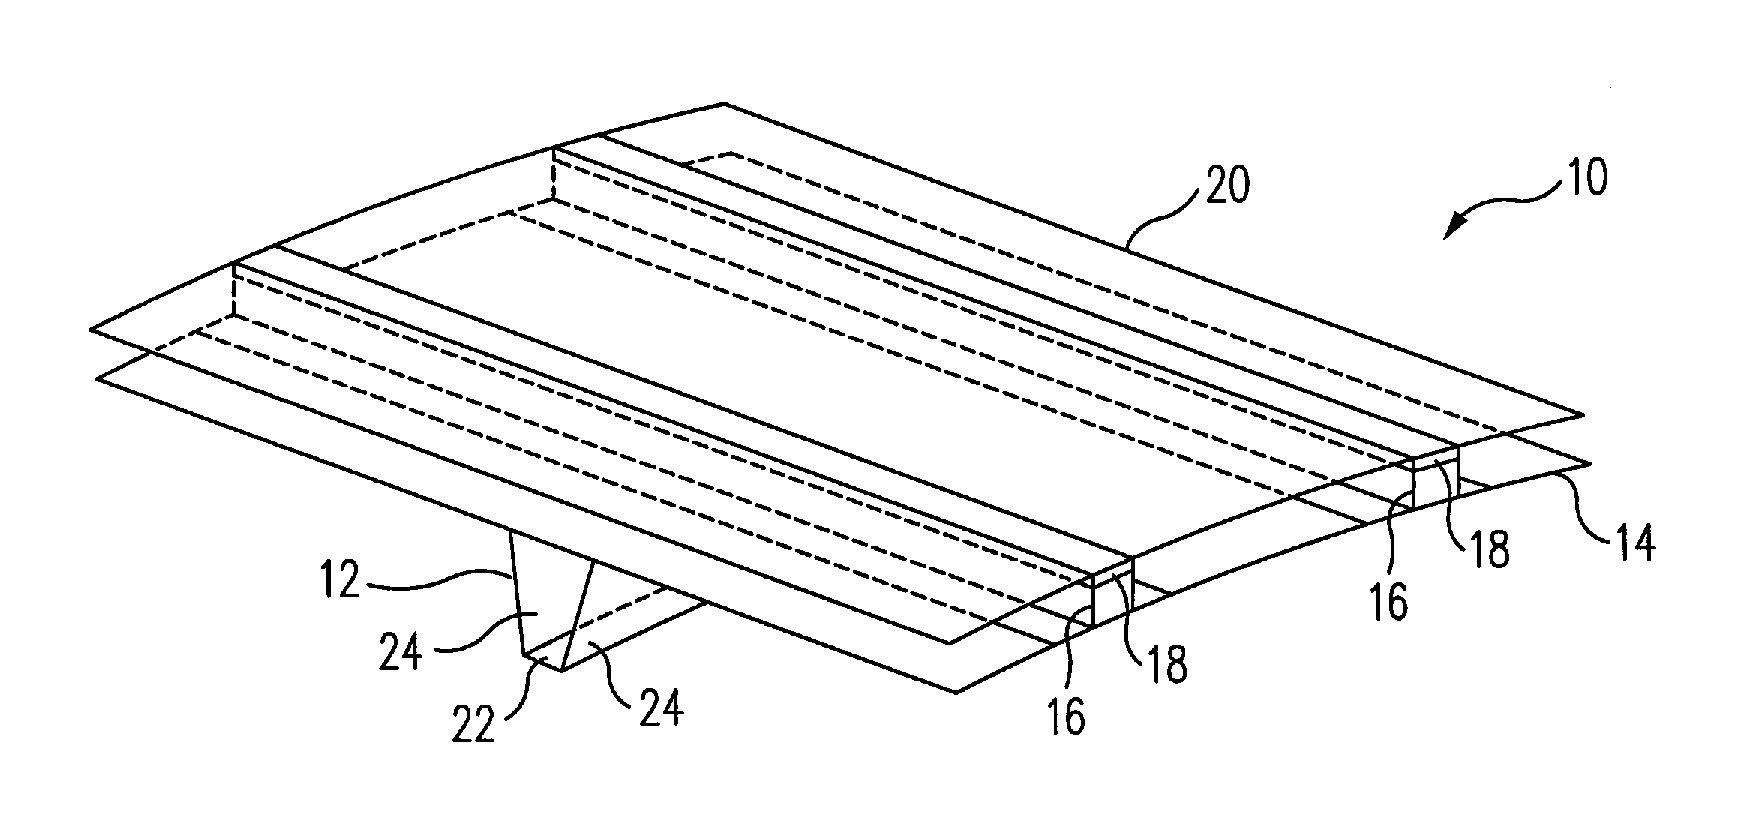 Composite aircraft structures with hat stiffeners